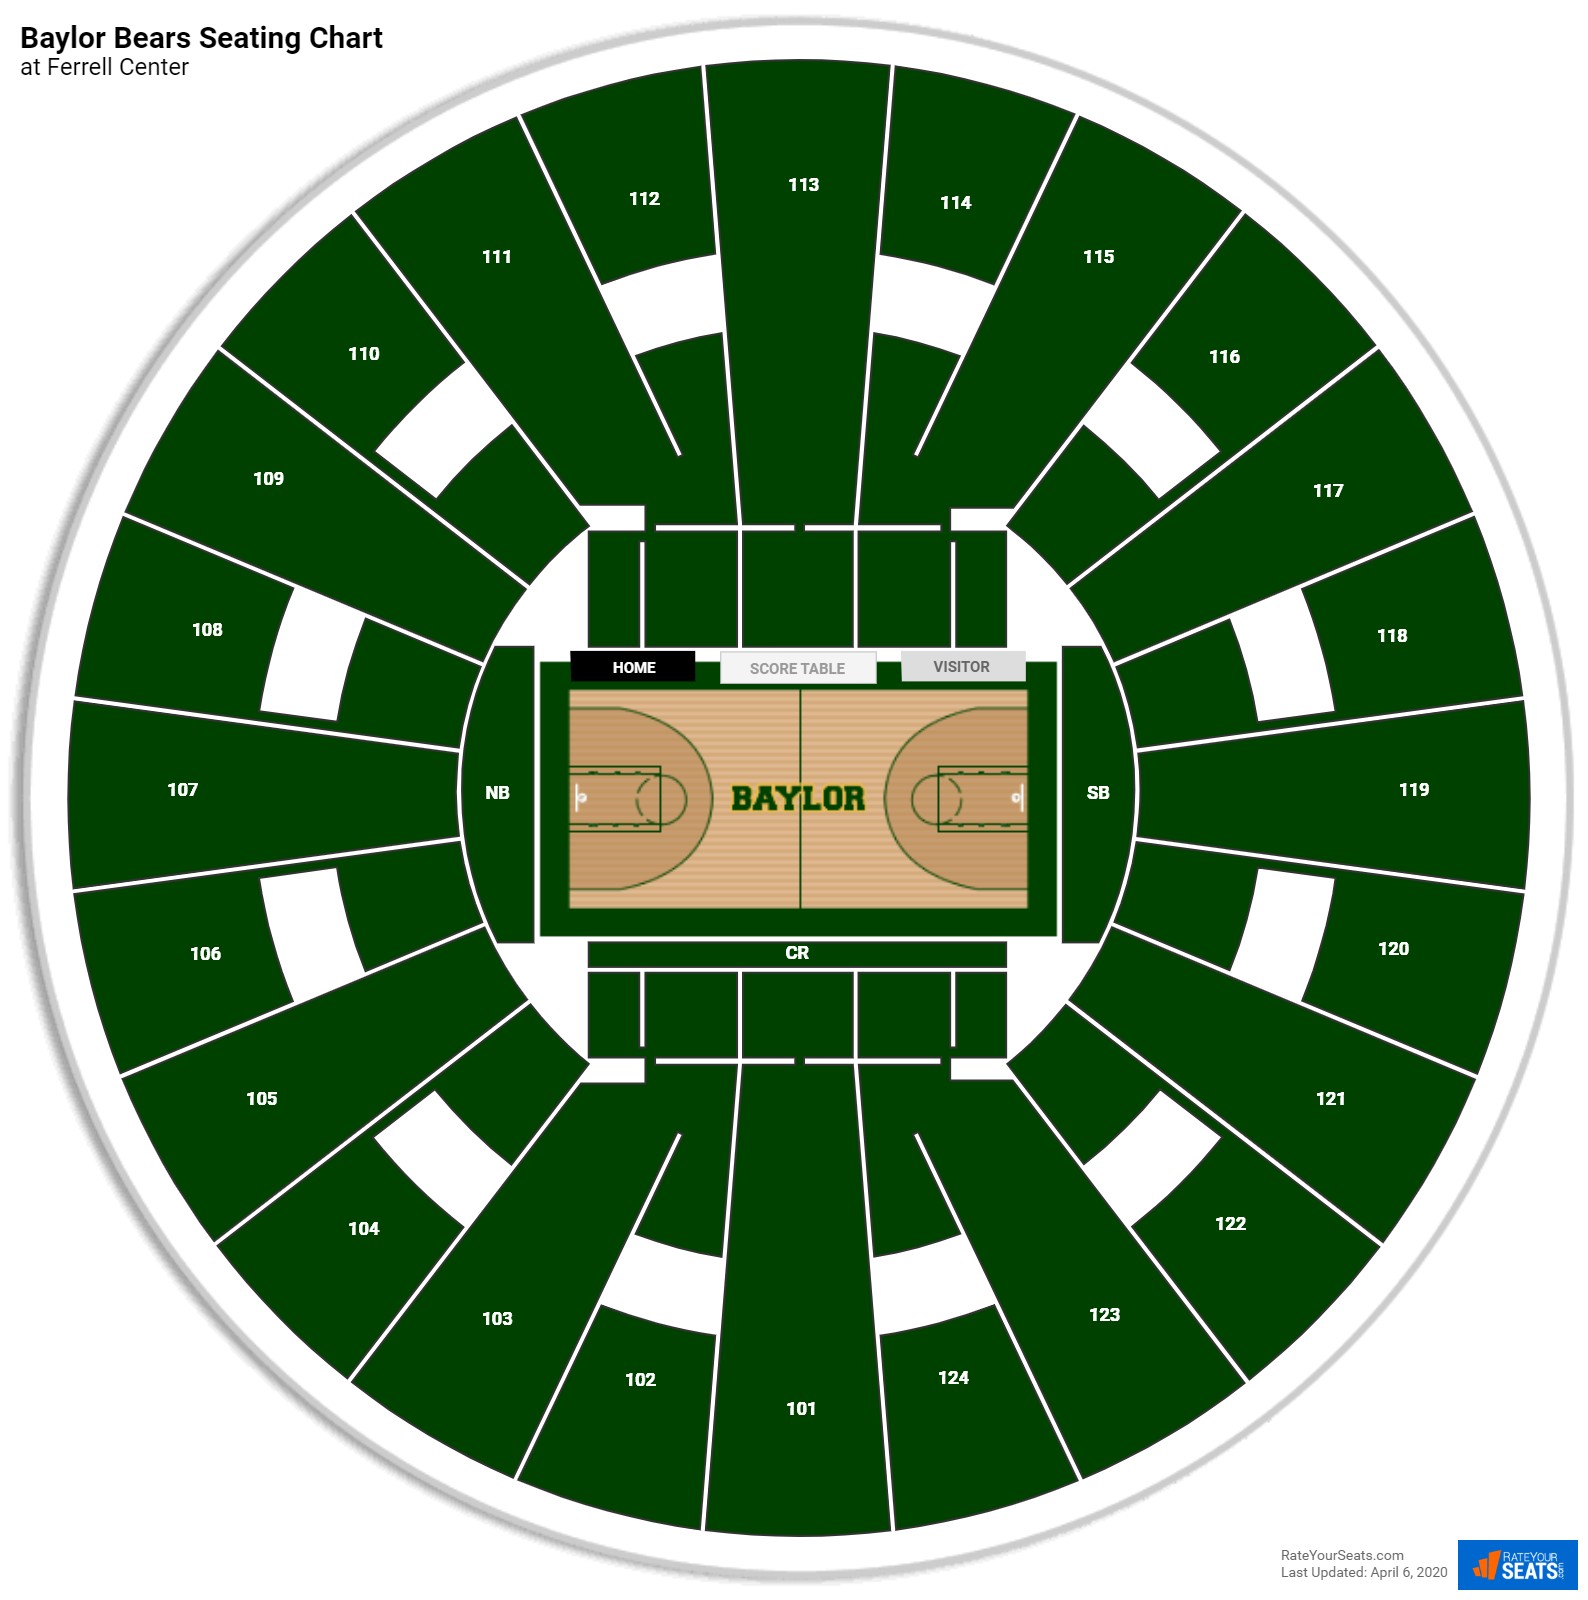 Ferrell Center Seating Charts - RateYourSeats.com